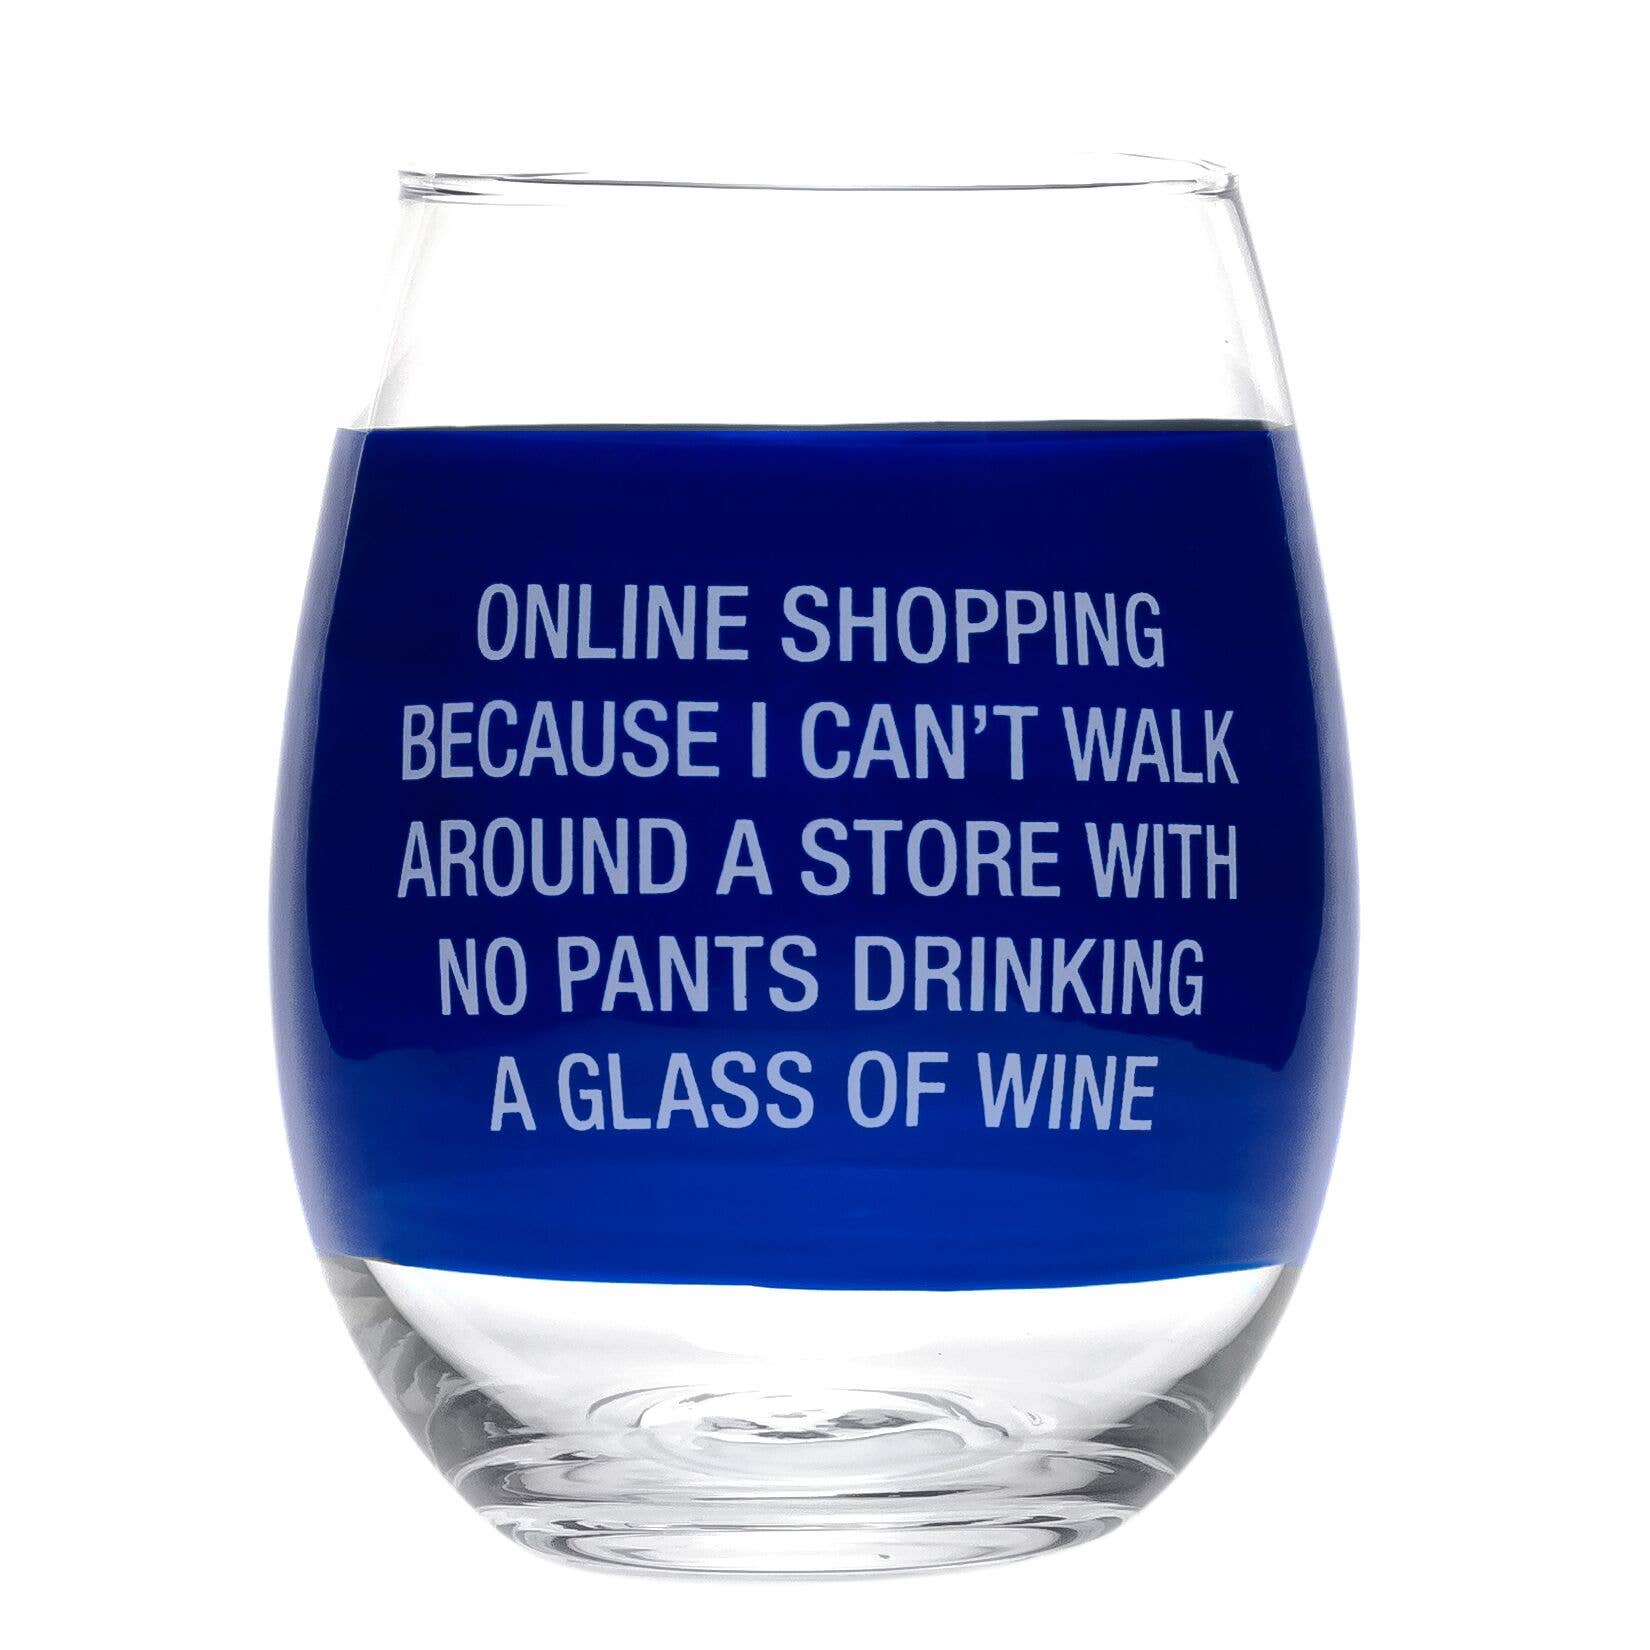 About Face Designs, Inc. Online Shopping Stemless Wine Glass